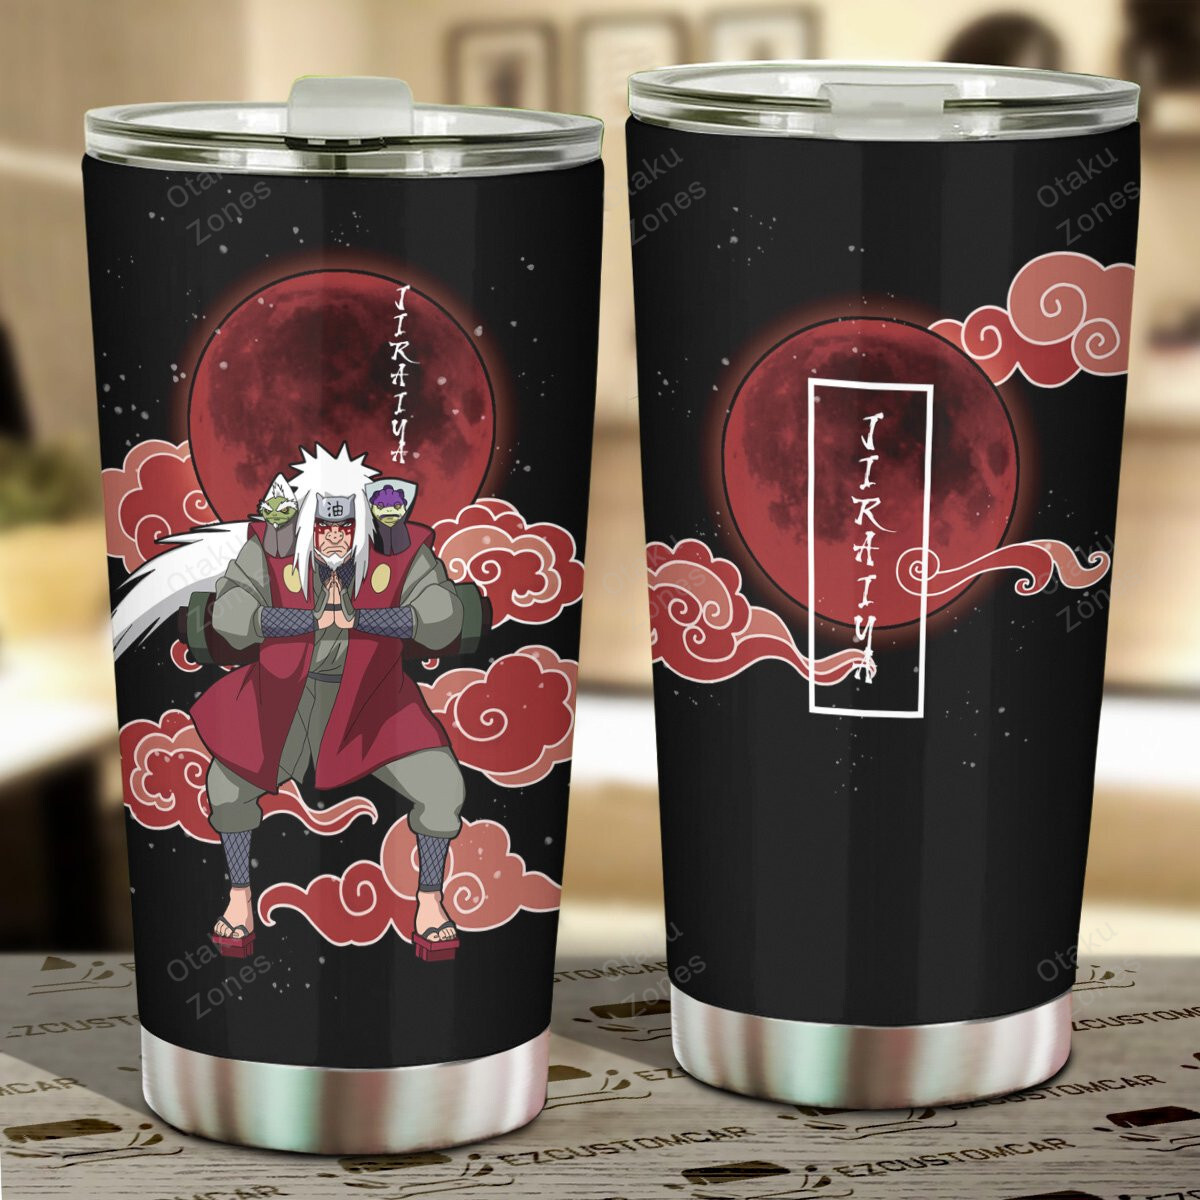 Go ahead and order your new tumbler now! 26